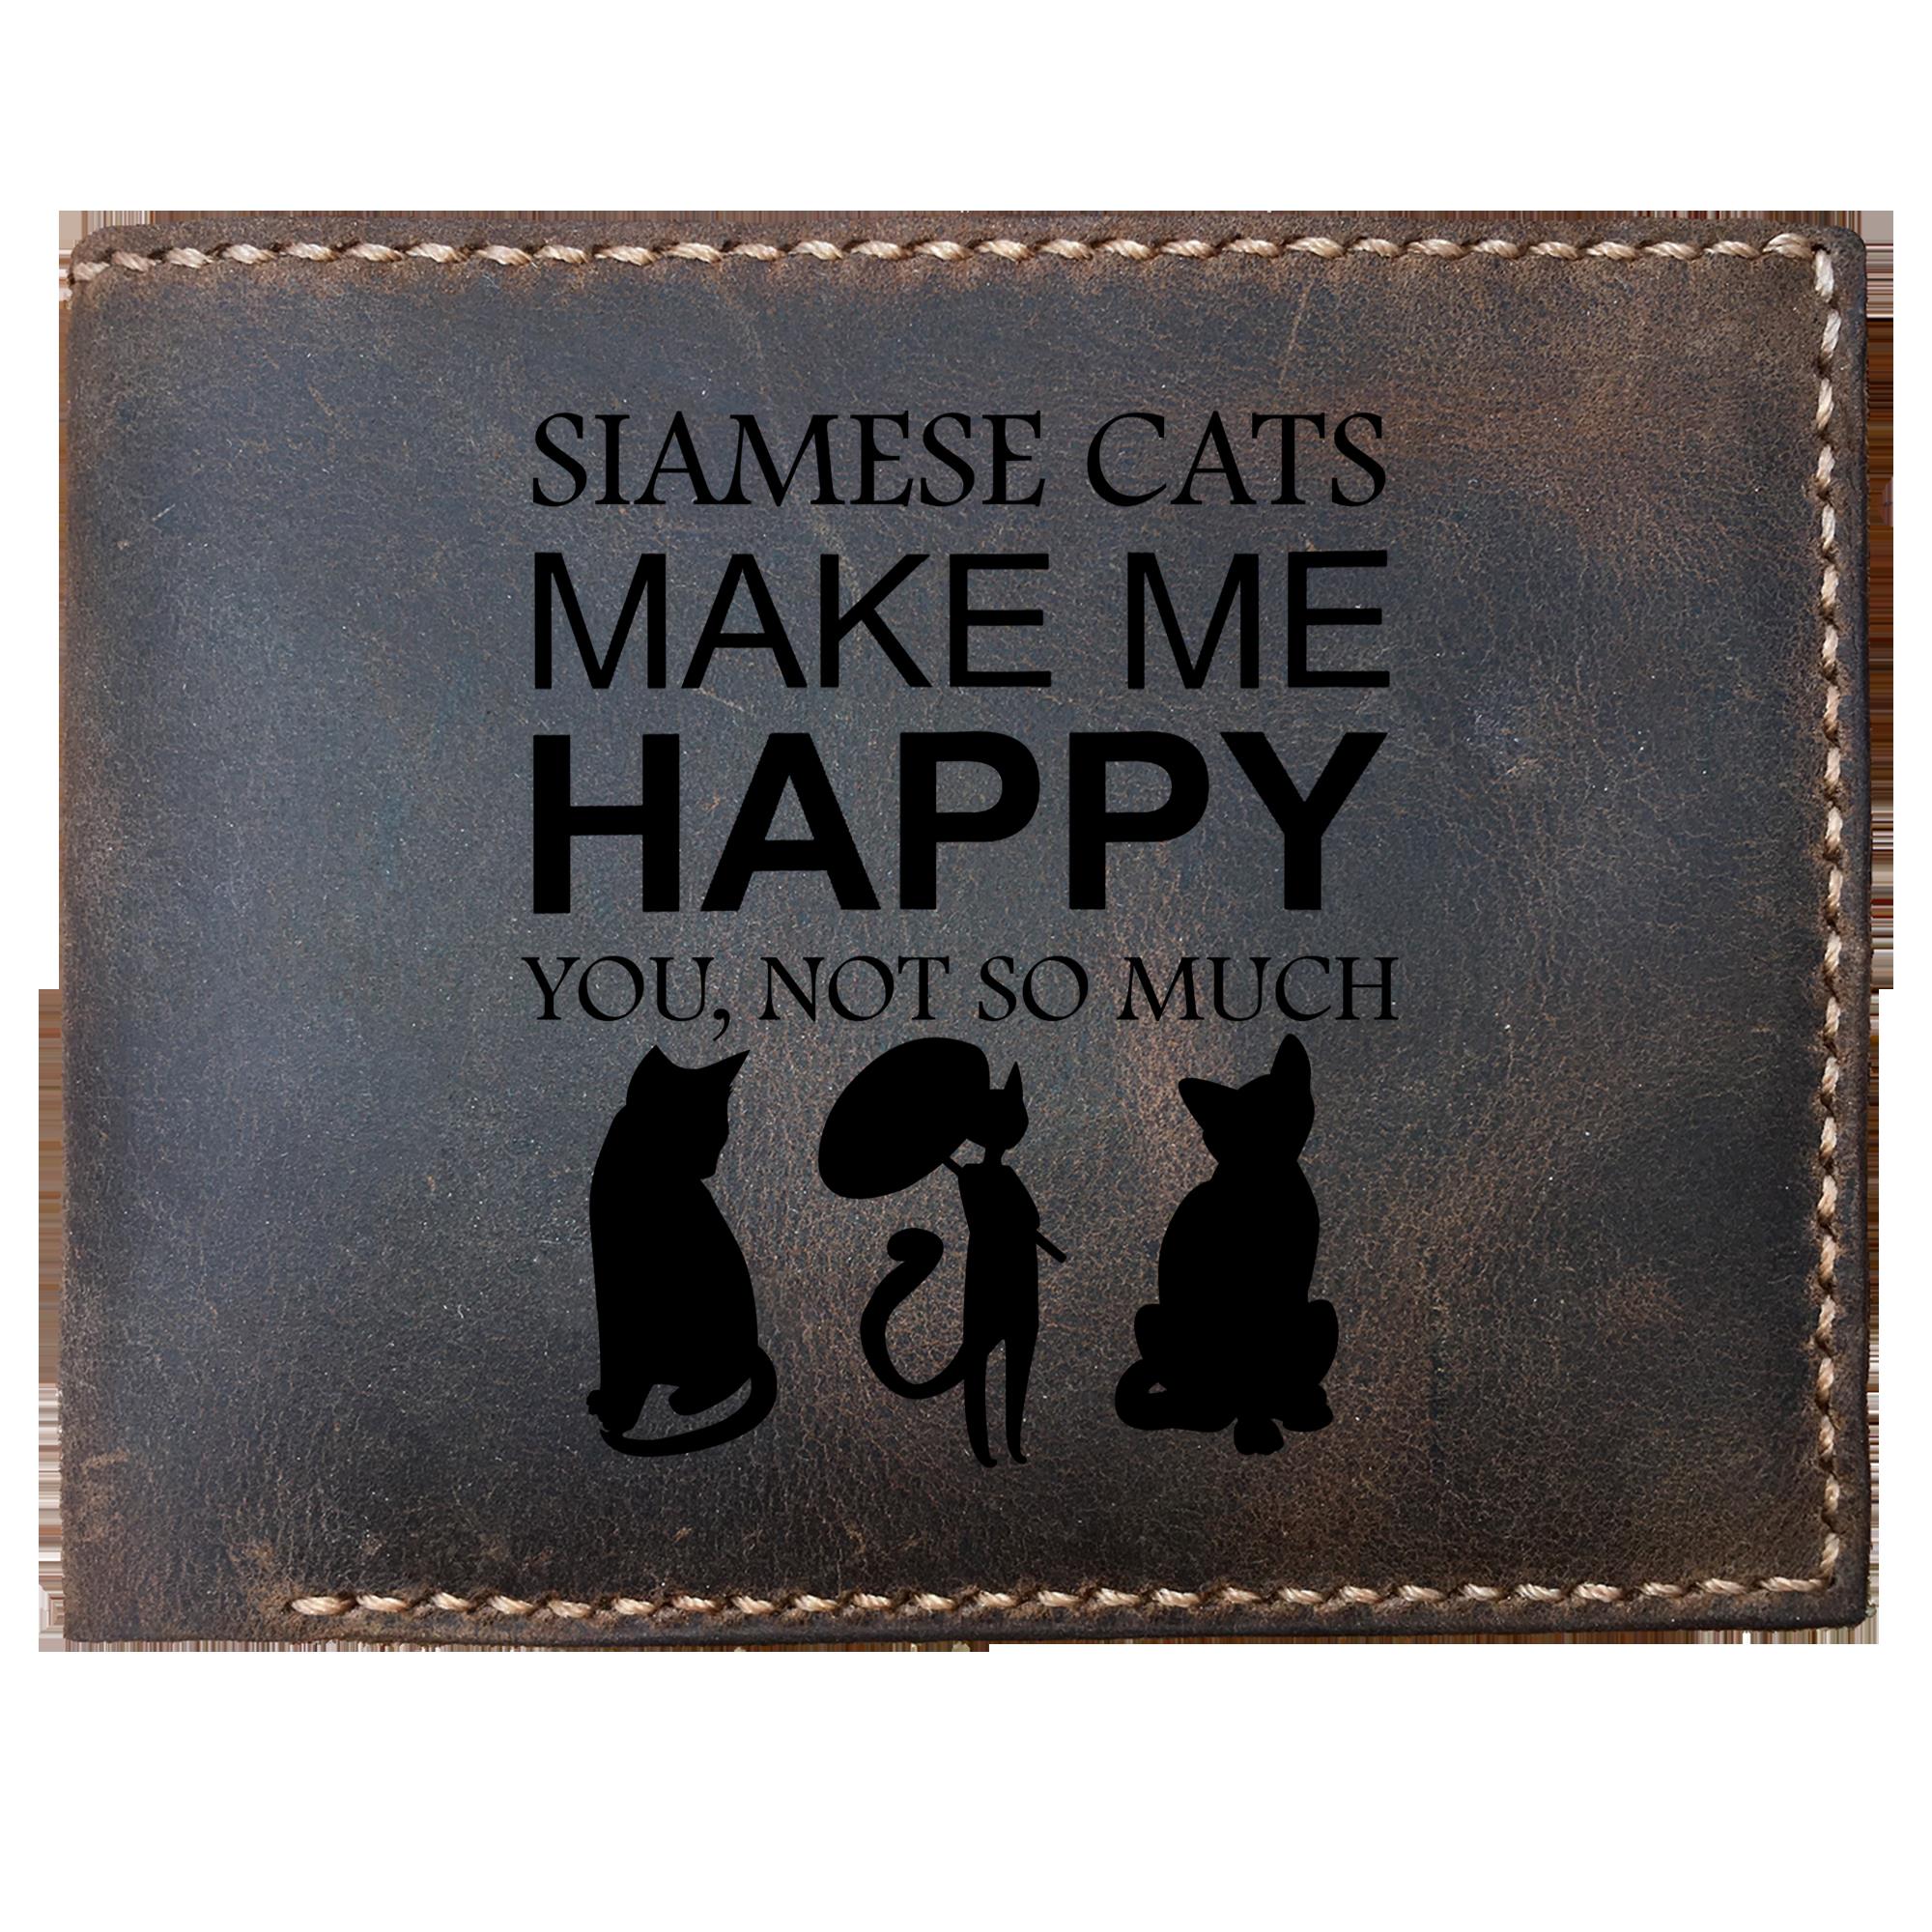 Skitongifts Funny Custom Laser Engraved Bifold Leather Wallet For Men, Siamese Cats Make Me Happy, You Not So Much Idea For Pussycat Lovers